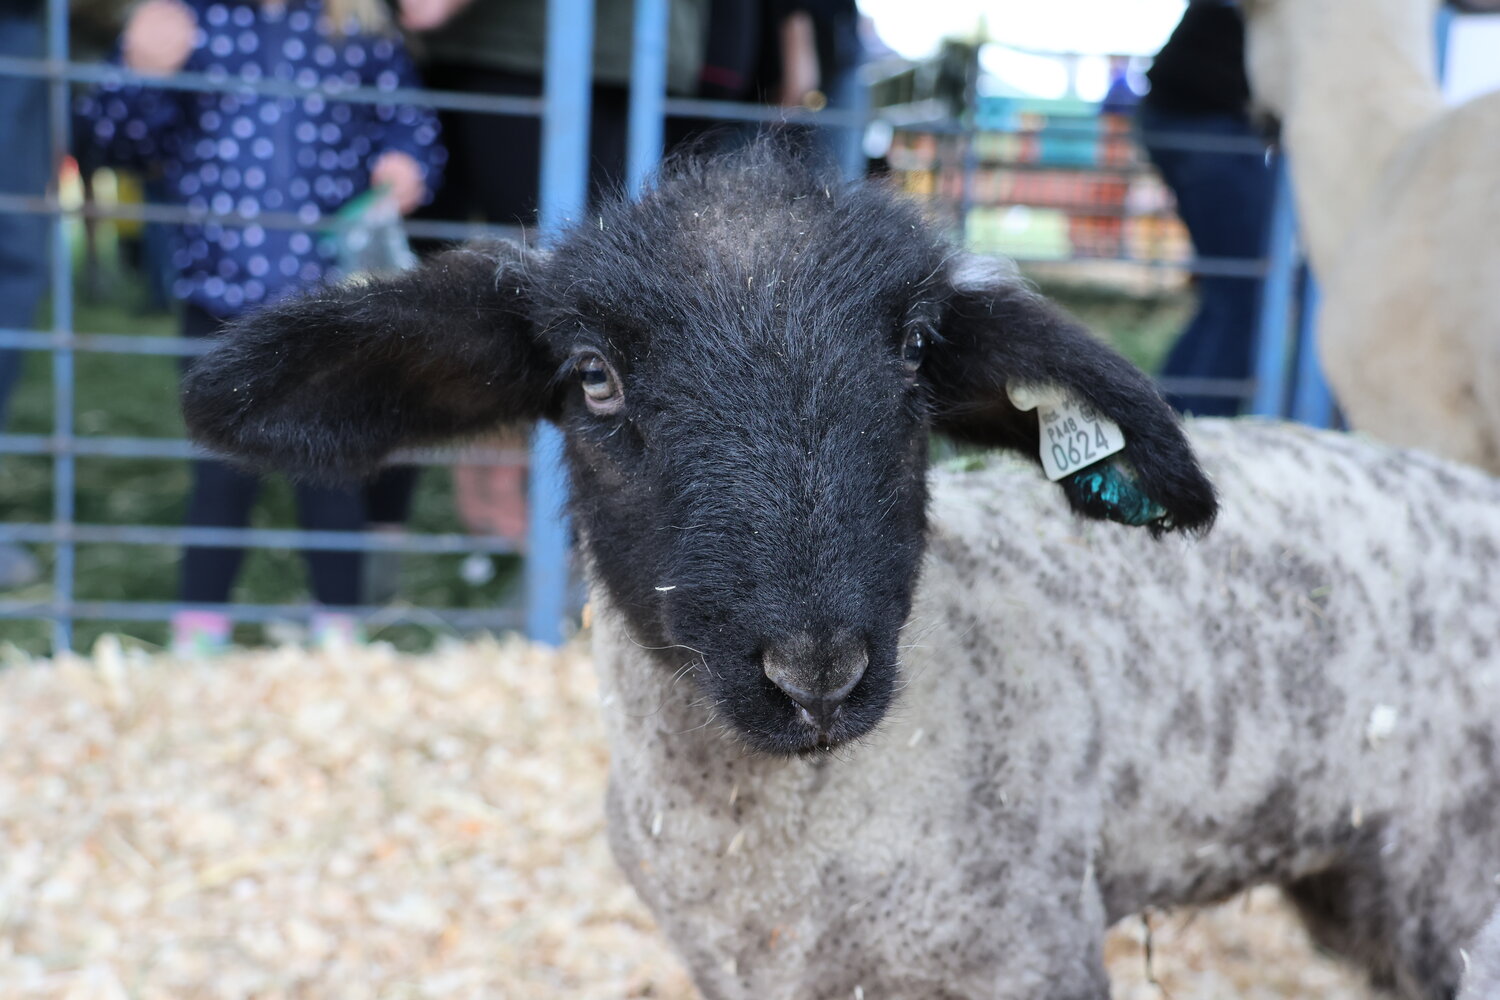 DelVal’s 74th A-Day celebration featured educational exhibits, livestock show, pig races and numerous demonstrations.